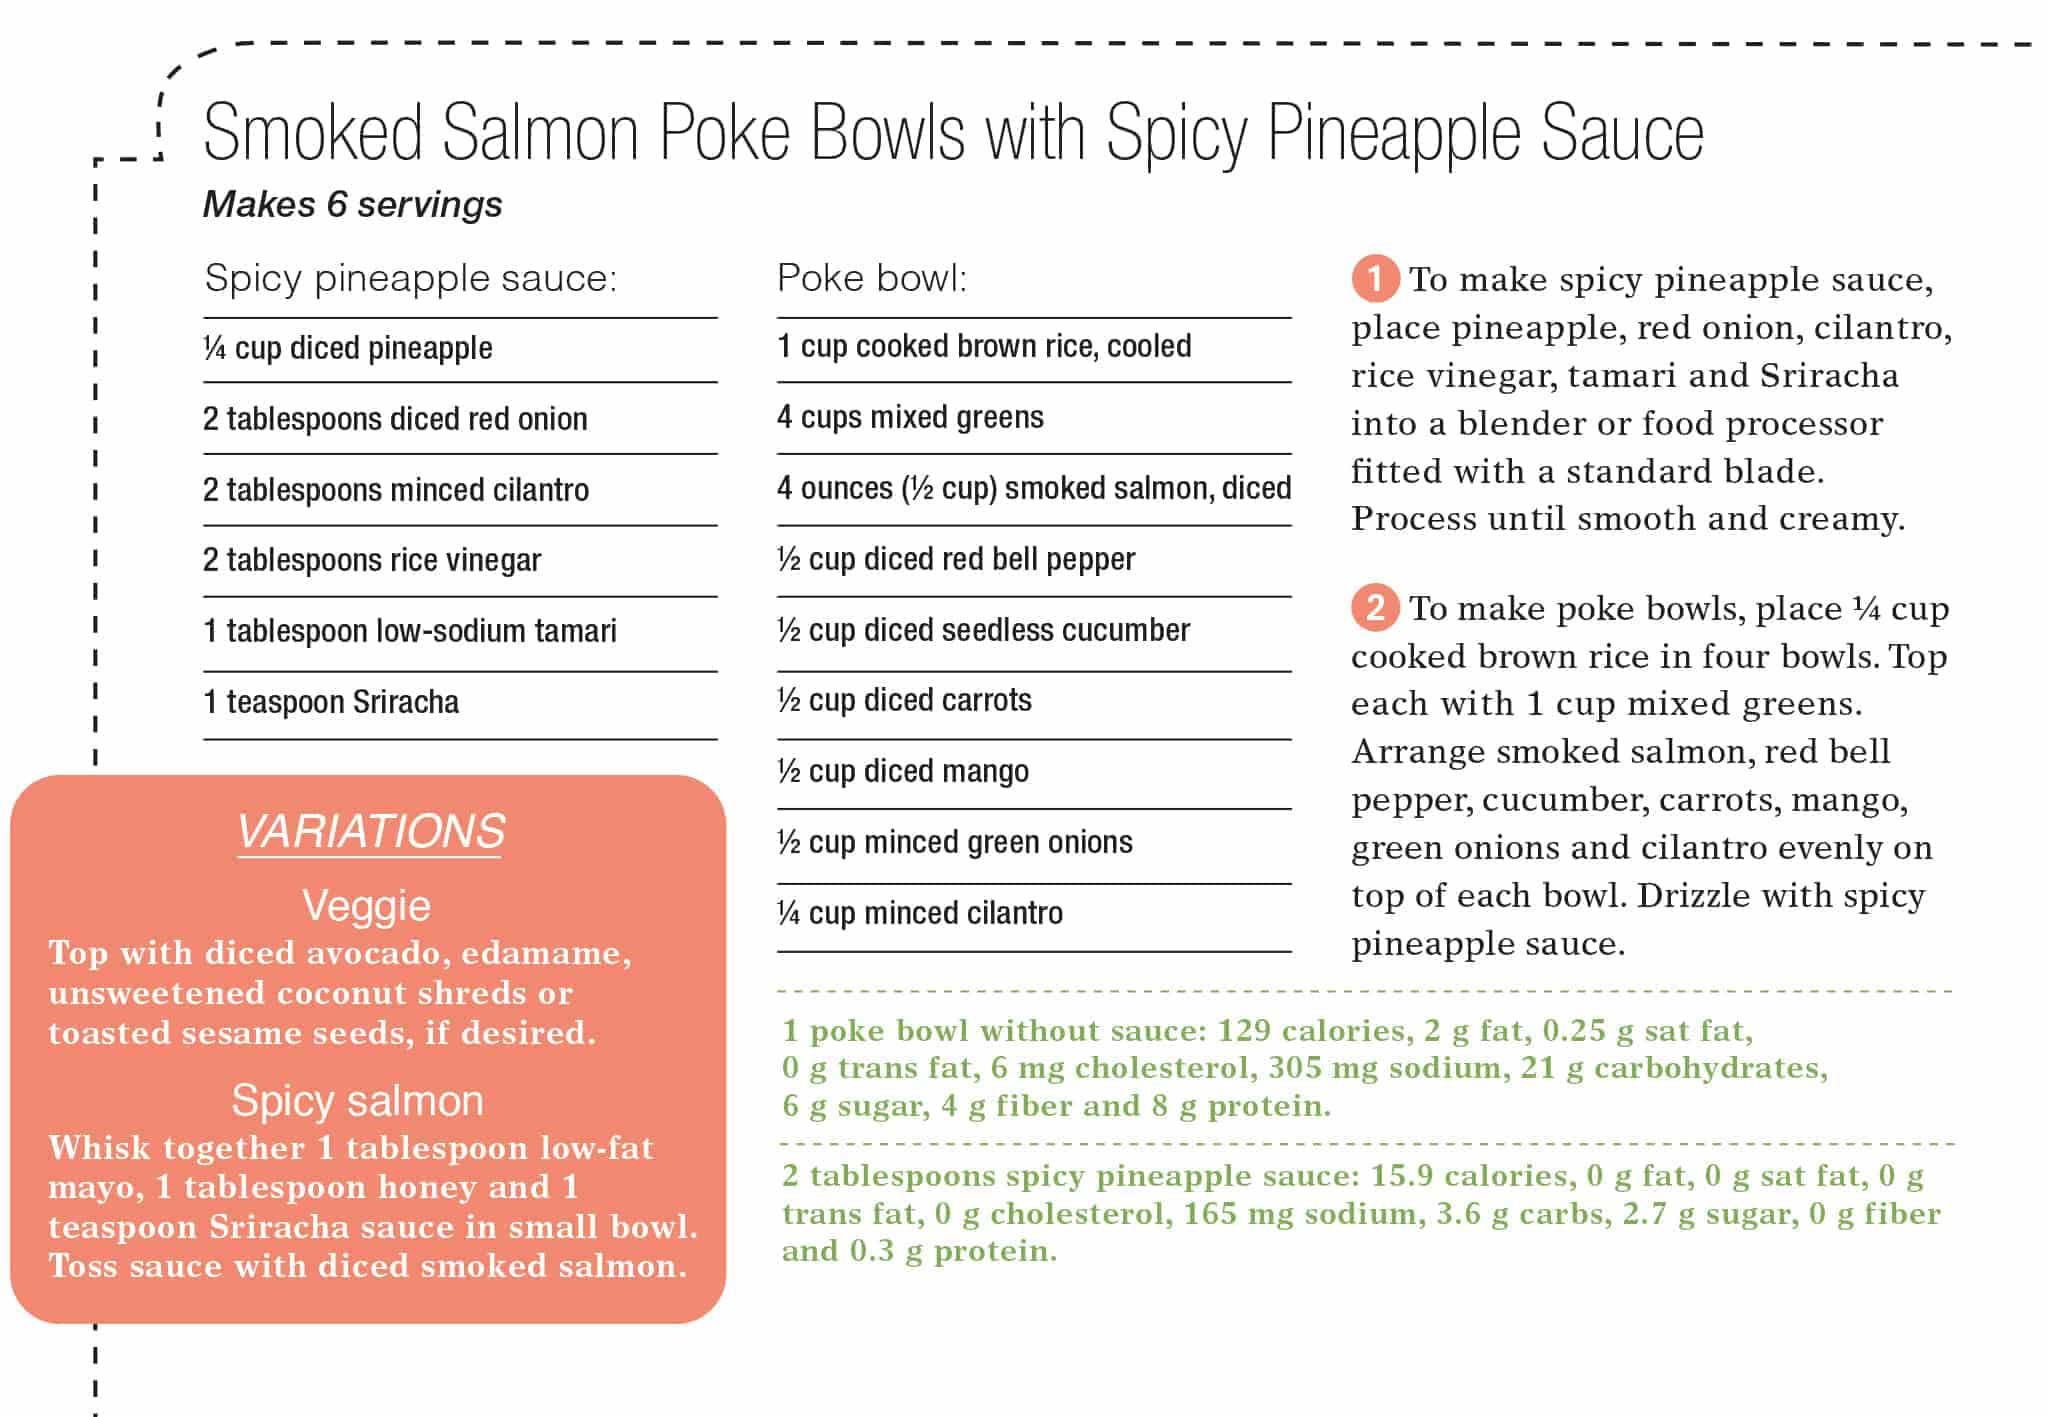 Recipe: Smoked Salmon Poke Bowls with Spicy Pineapple Sauce